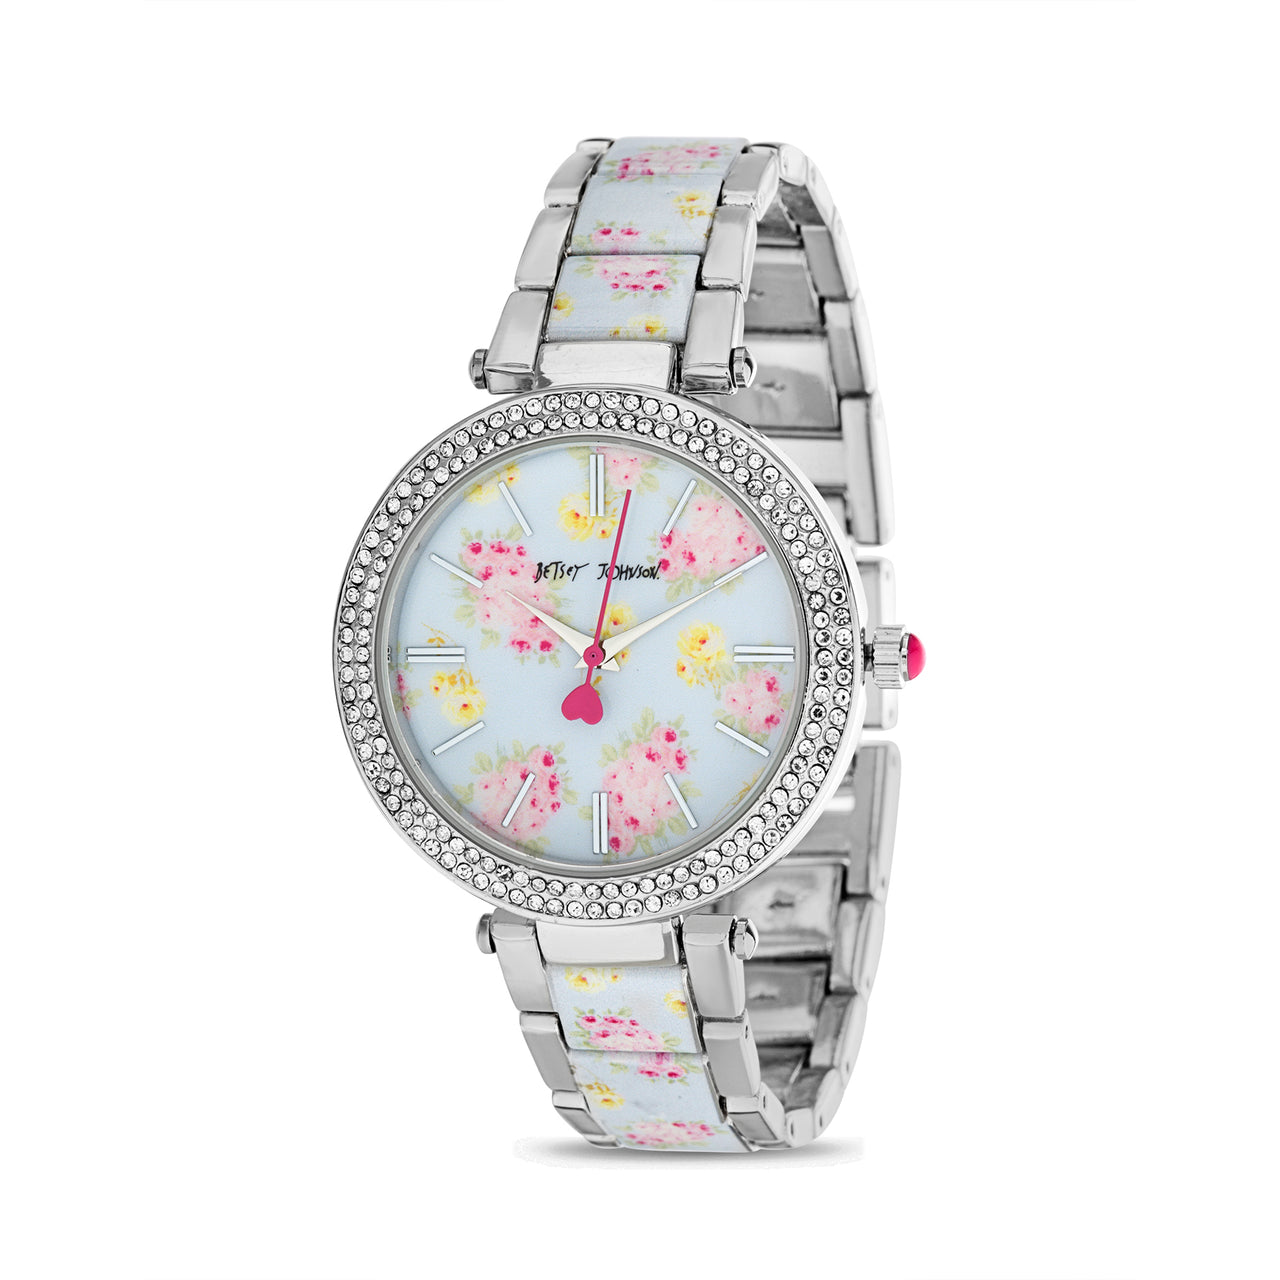 Betsey Johnson Silver Case and Floral Link Strap Watch with Floral Printed Dial with Stone Bezel for Women